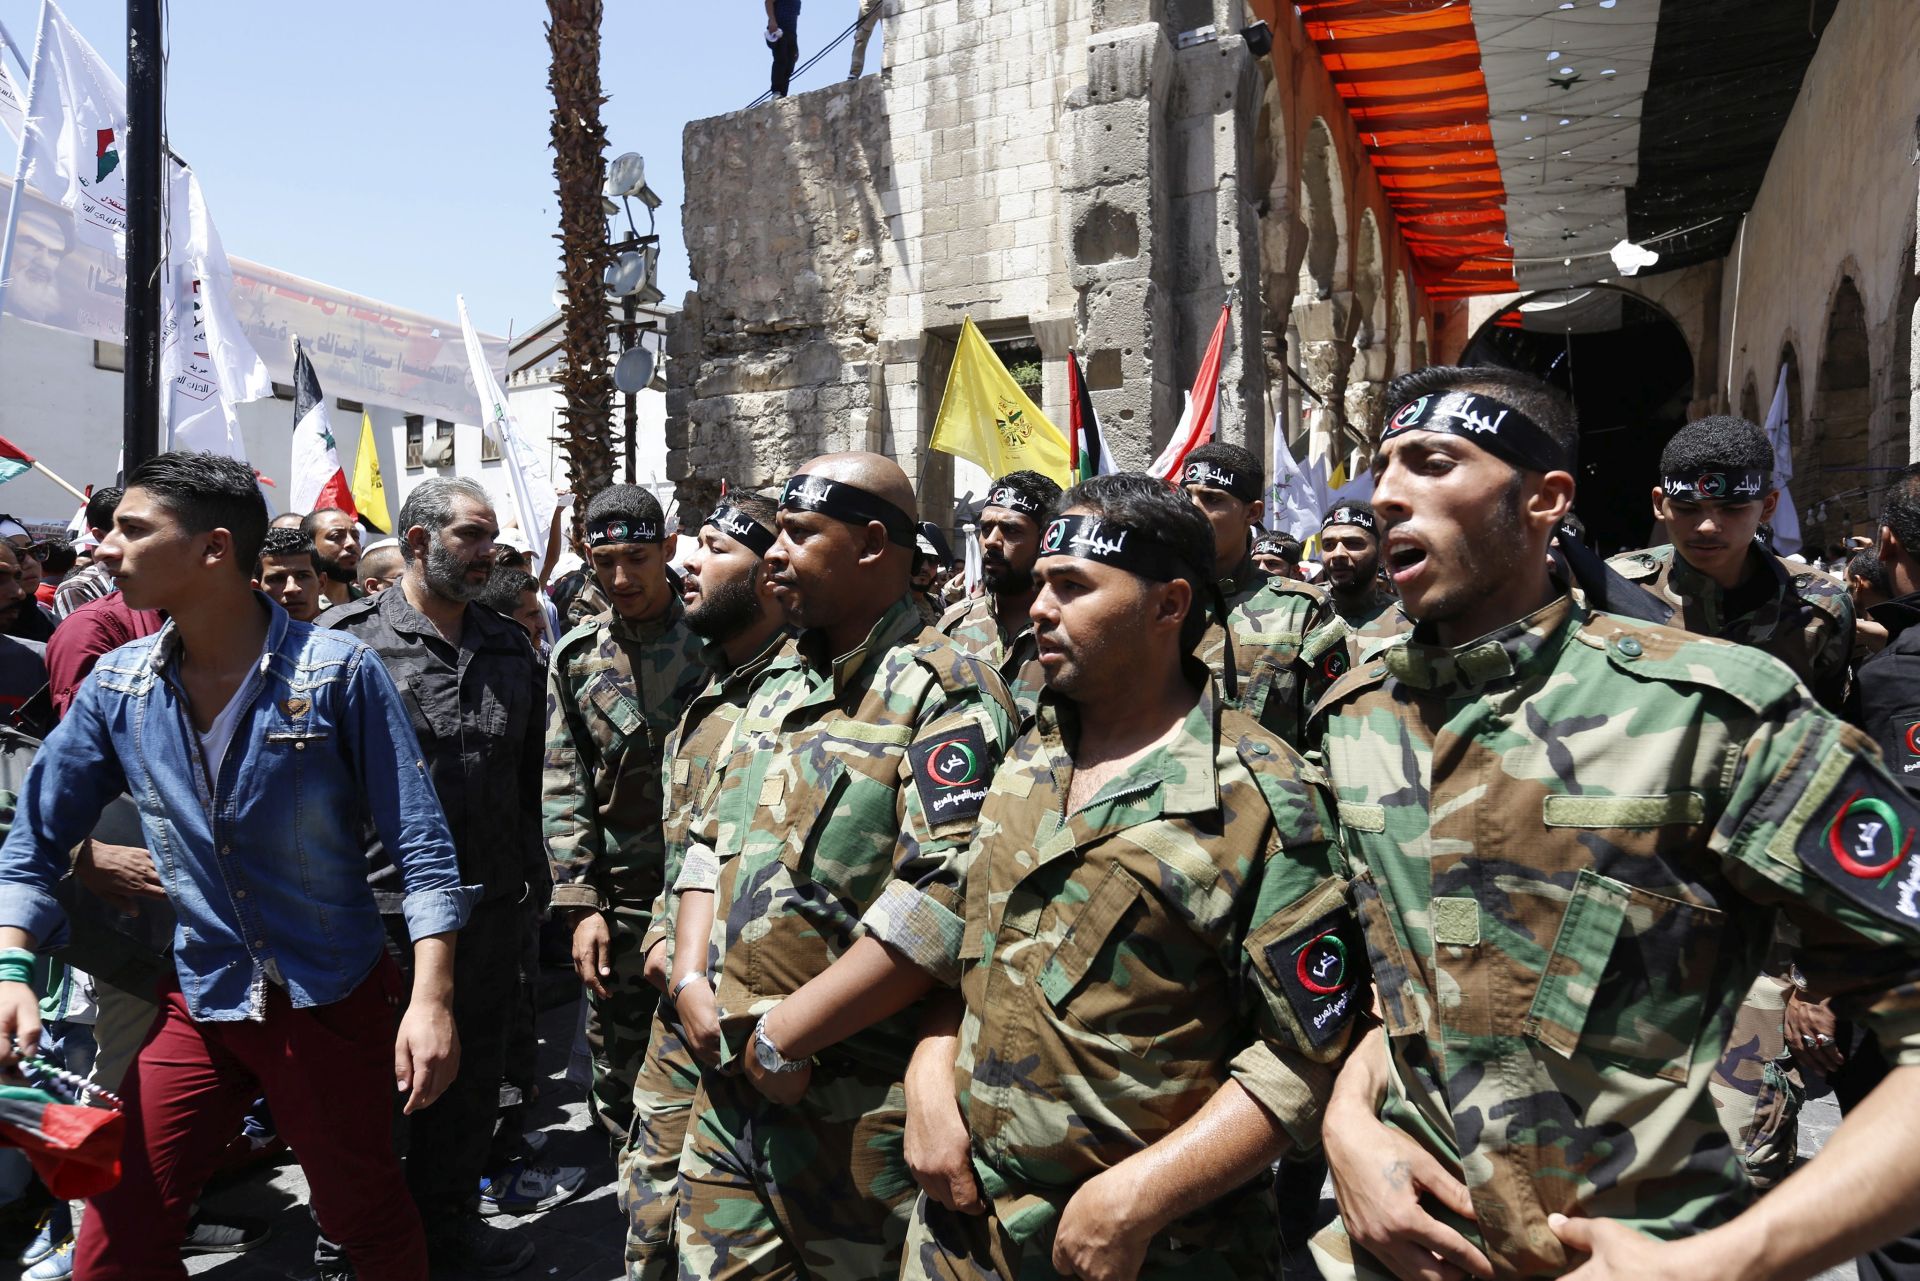 epa05400866 Protesters take part in a march marking Al-Quds day (Jerusalem Day) in the Old City of Damascus, Syria, 01 July 2016. Many Muslim countries mark Al-Quds Day, an annual day of protest decreed in 1979 by the late Iranian ruler Ayatollah Khomeini, on the last Friday of Ramadan. The day is celebrated in a move to express support for the Palestinian people and their resistance against Israeli occupation.  EPA/YOUSSEF BADAWI